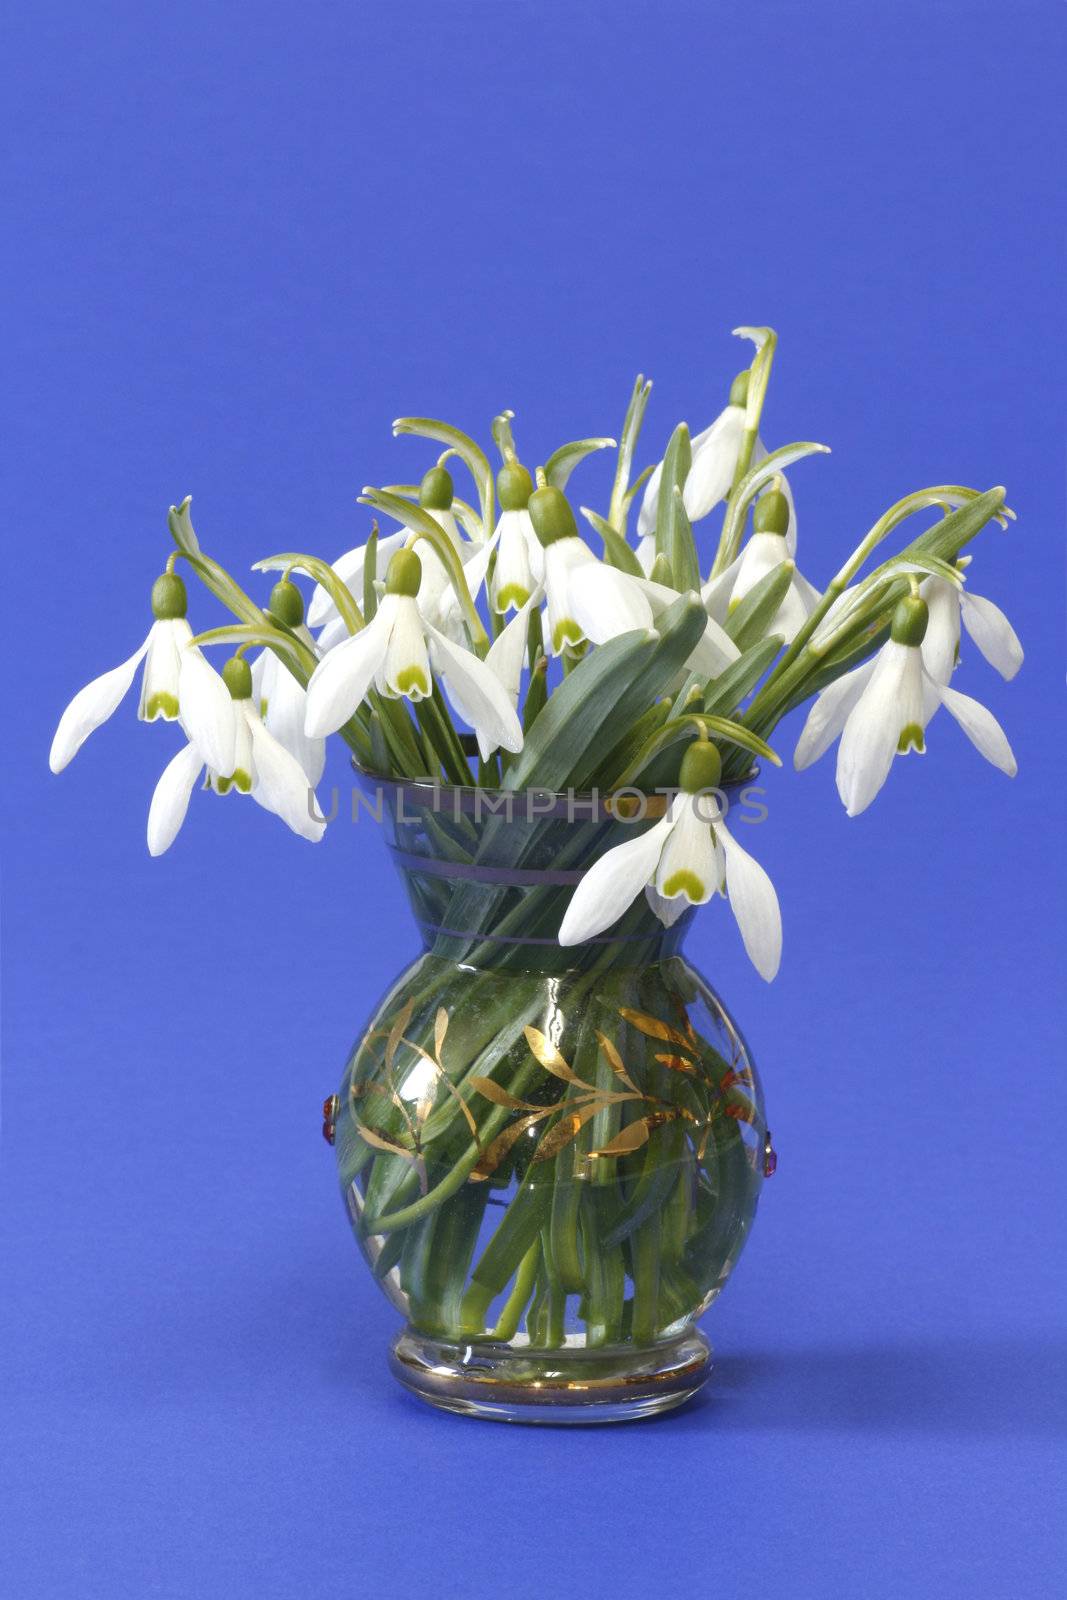 Close-up of snowdrops over blue background